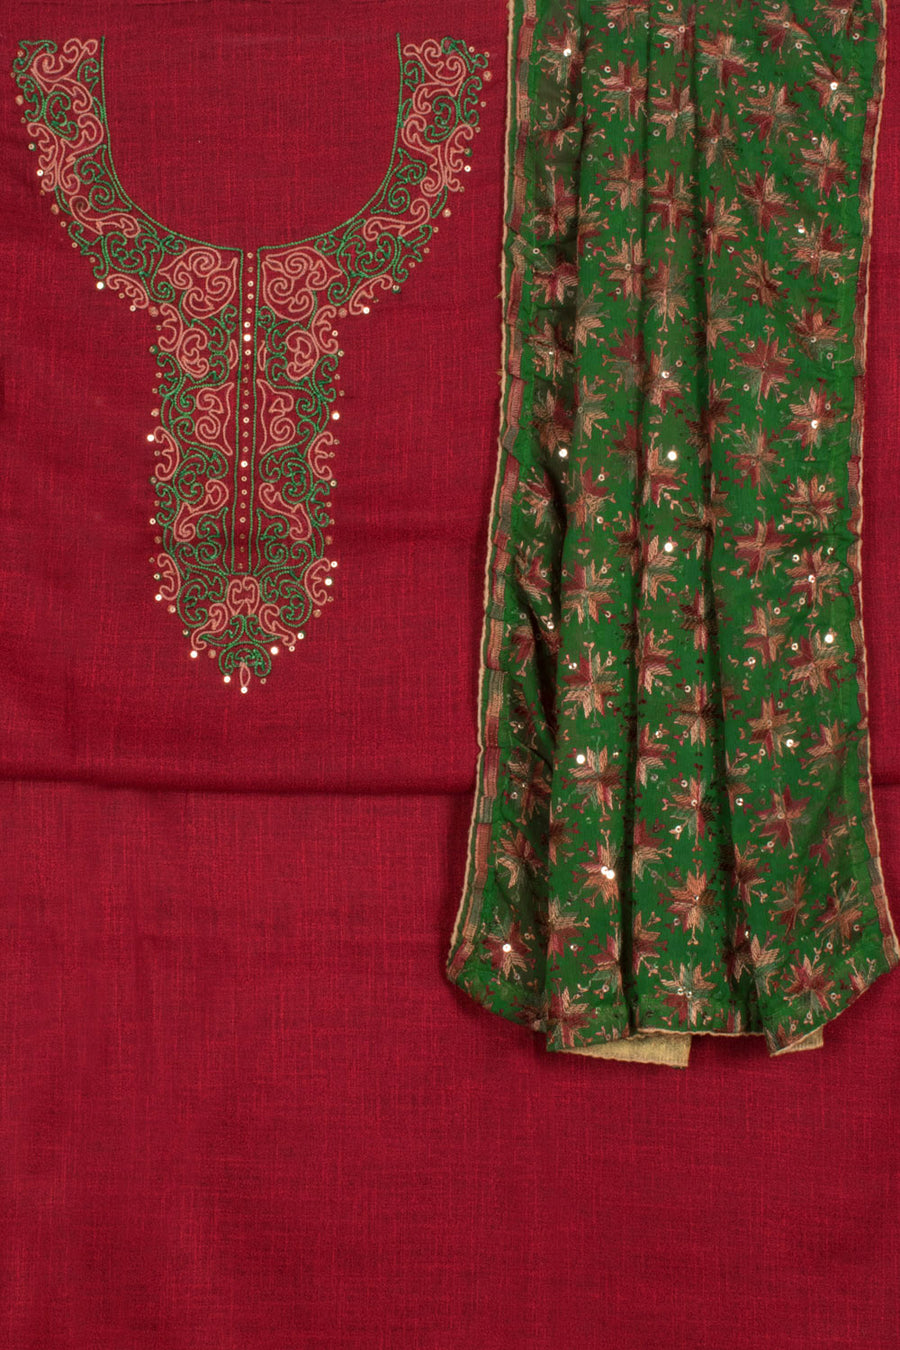 Hand Embroidered Blended Cotton 3-Piece Salwar Suit Material with Cord Embroidery Yoke and Phulkari Georgette Dupatta 